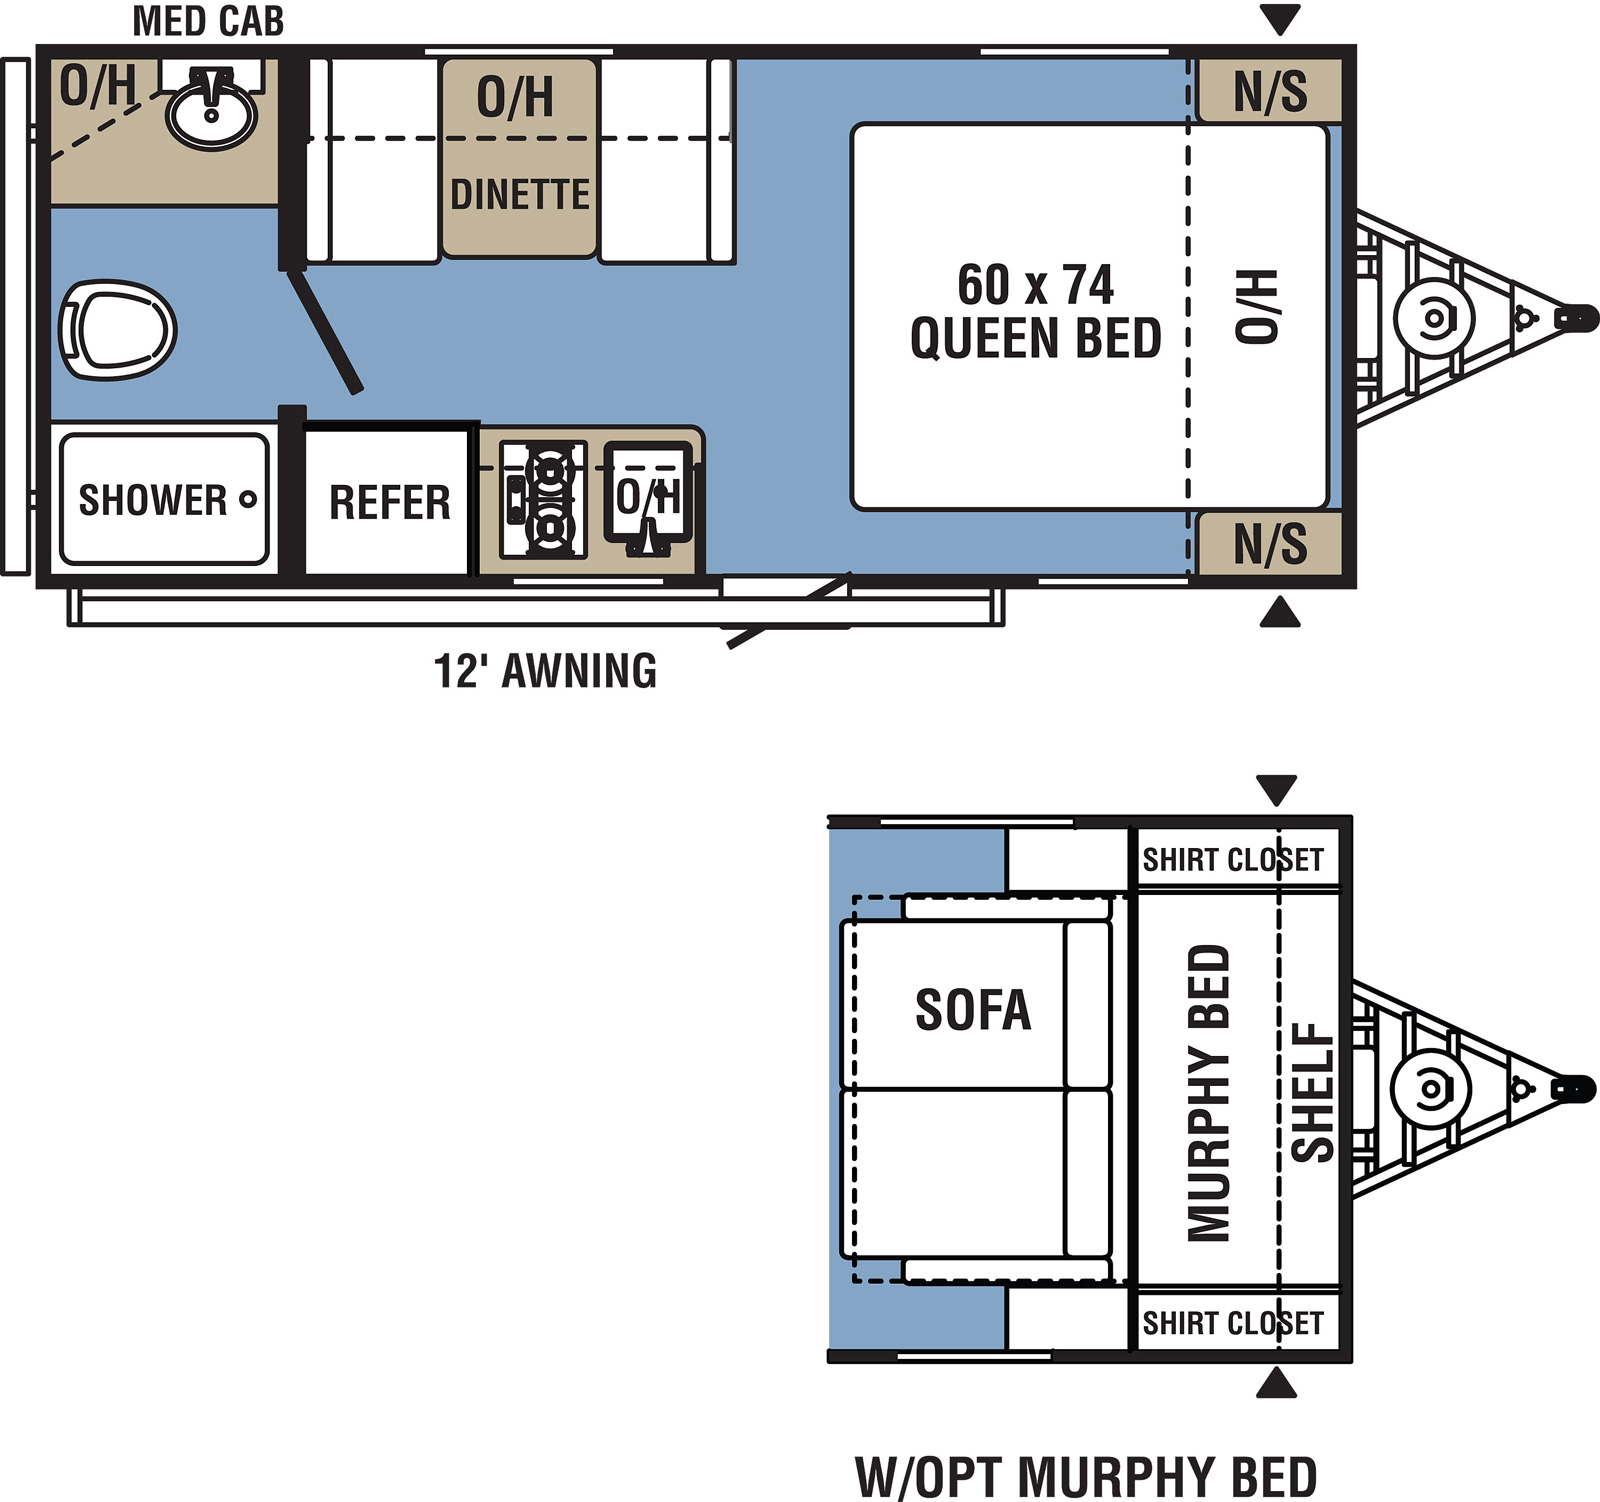 Clipper Ultra-Lite 17FQ floorplan. The 17FQ has no slide outs and one entry door.